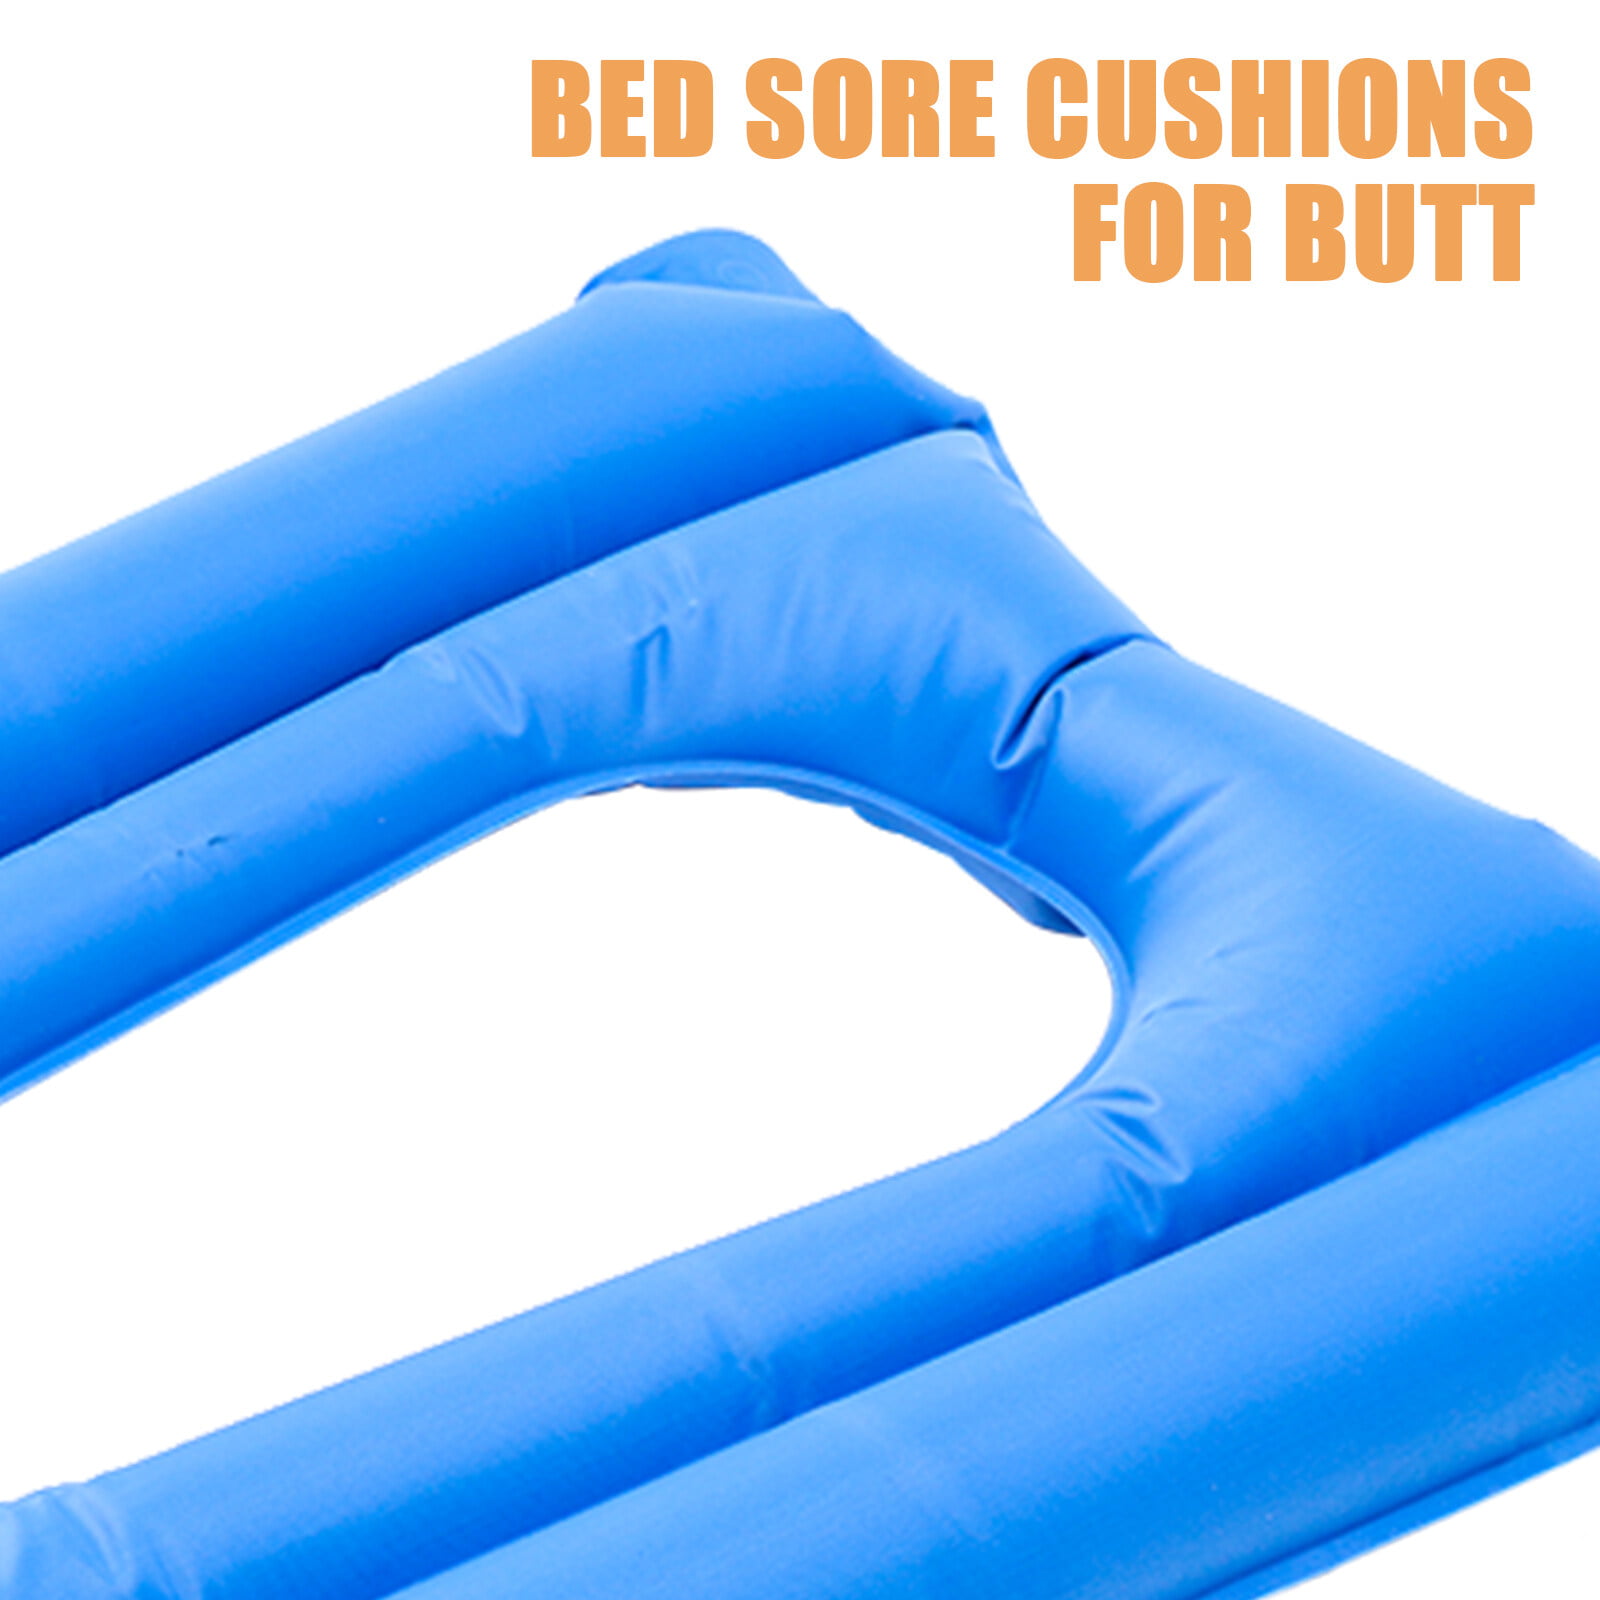 TURNSOLE Bed Sore Cushions for Butt for Elderly in Bed - Bed Sore Pads for  Bedridden Patients - Inflatable Seat Cushions for Pressure Relief